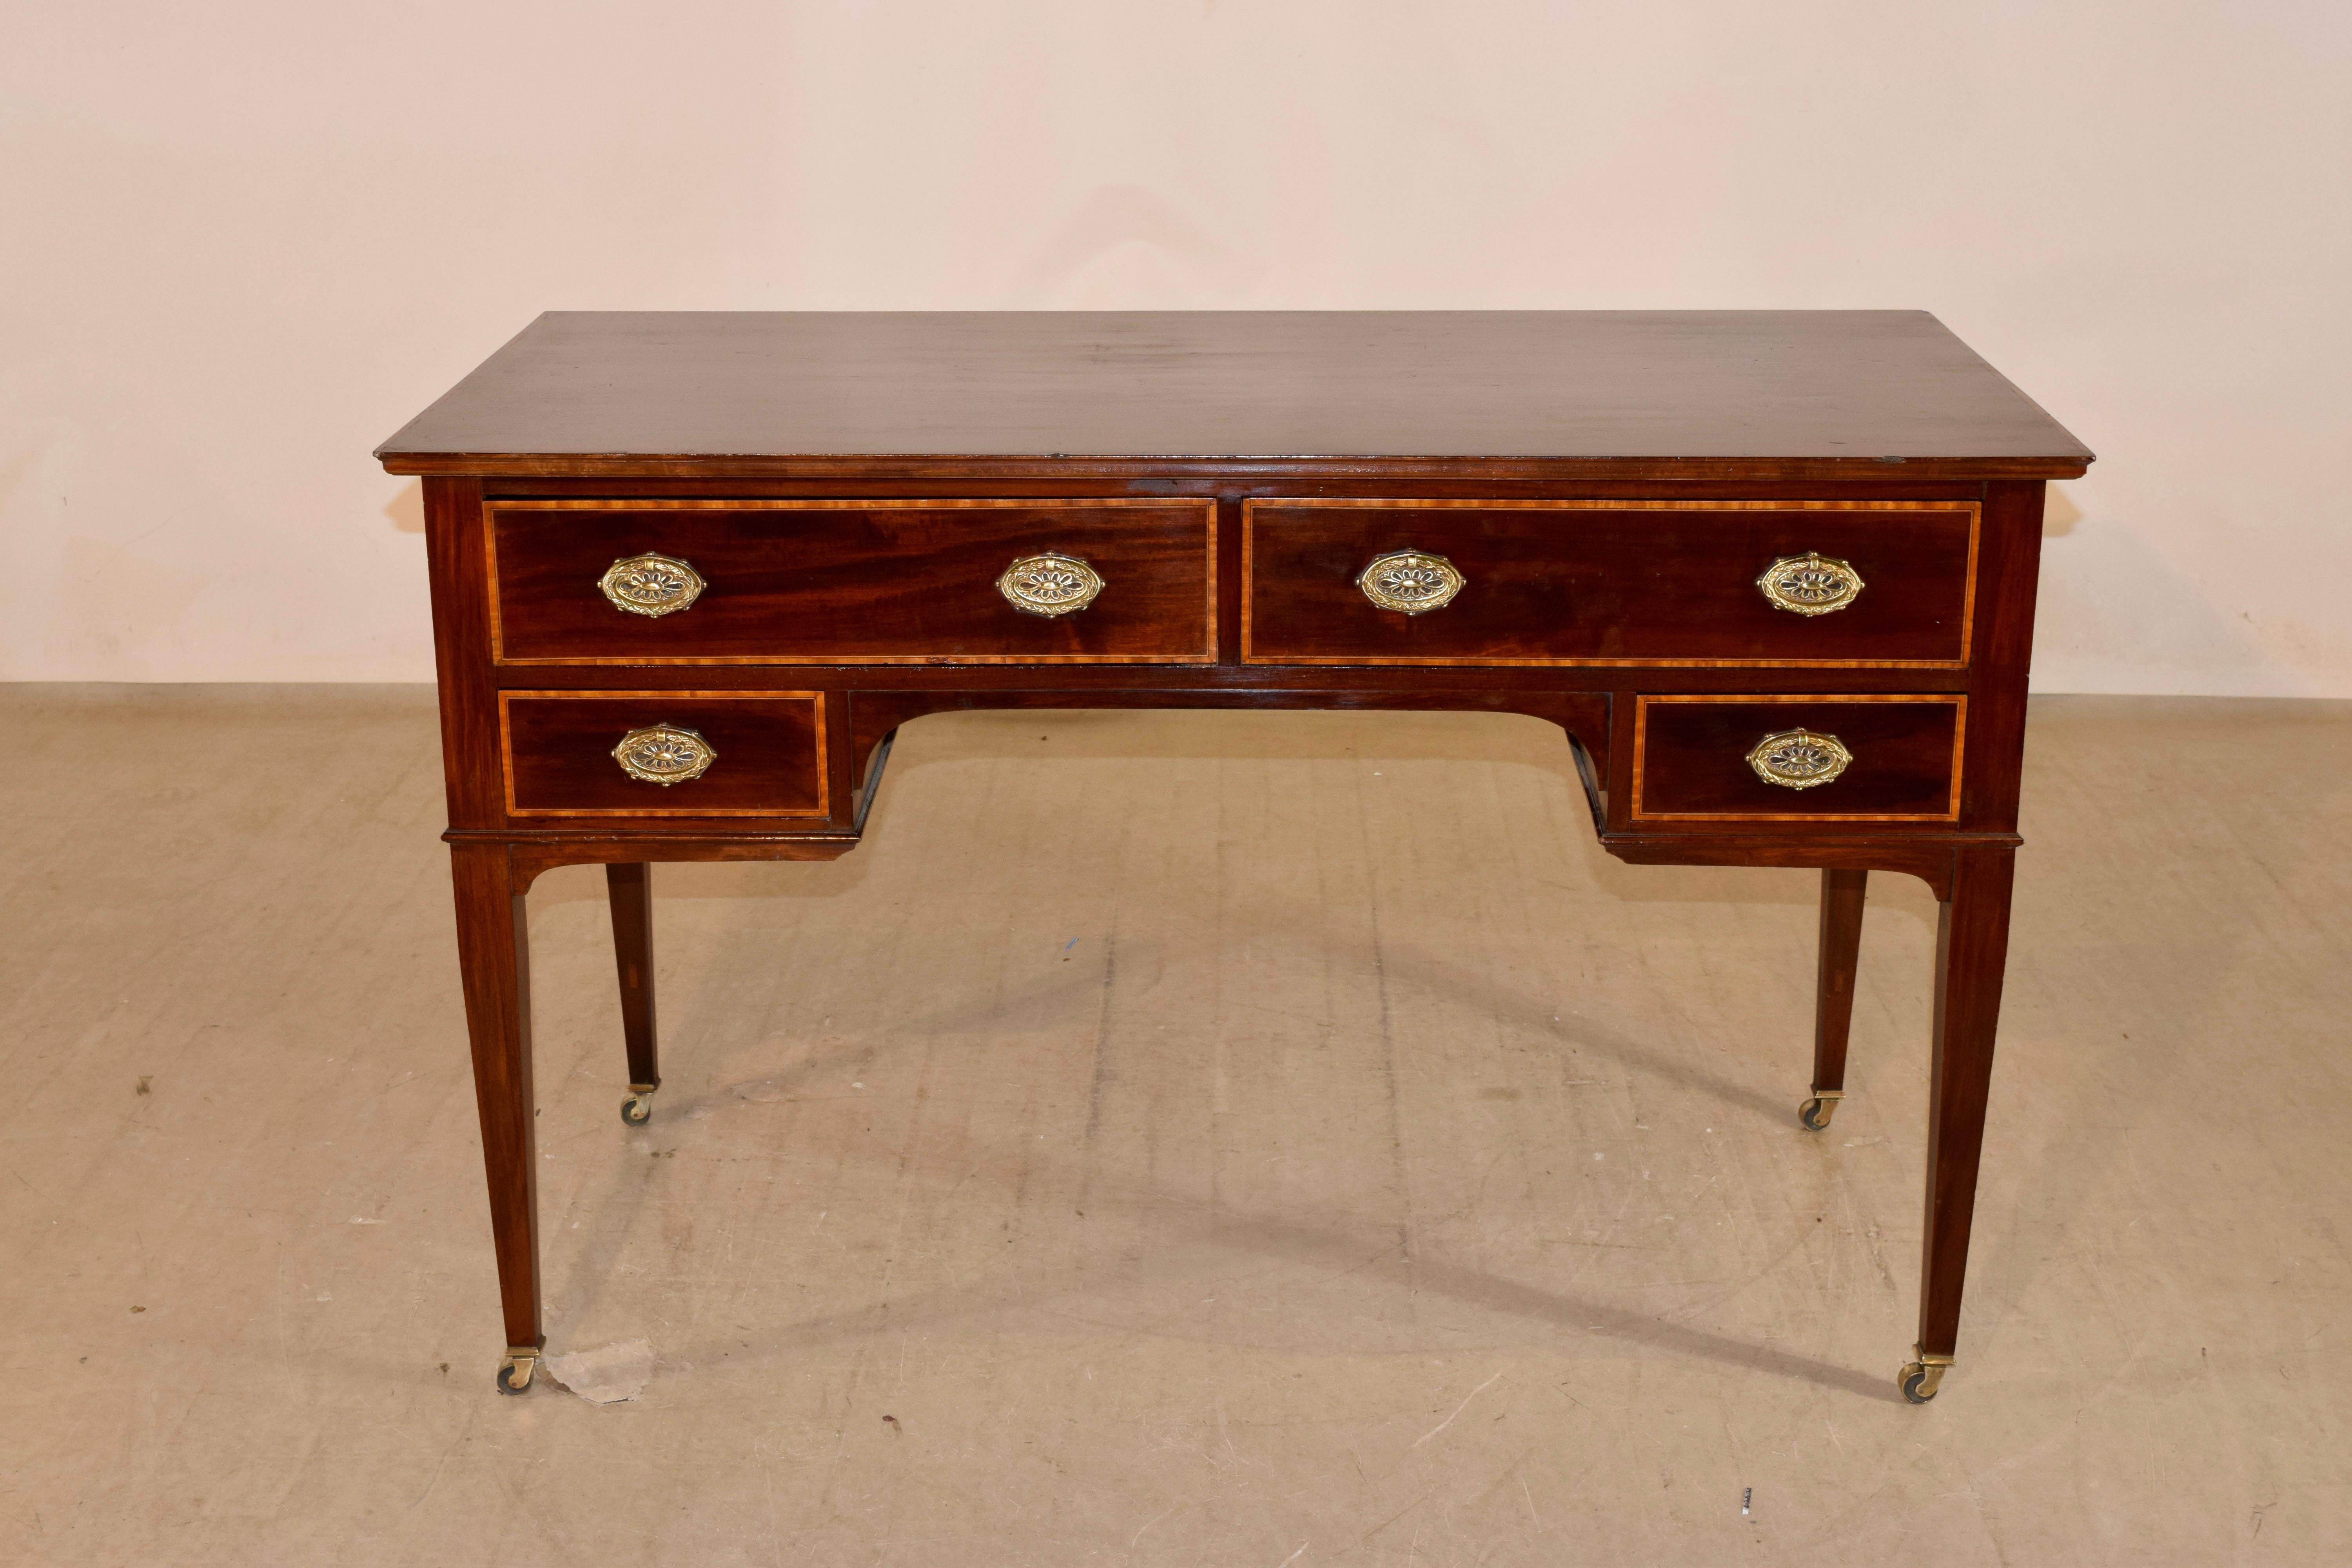 Mid-20th-century mahogany desk with satinwood inlay. The top is wonderfully grained and is made from two boards, banded in satinwood. The sides are simple and also have gorgeous graining. The front of the desk contains four drawers, also banded in